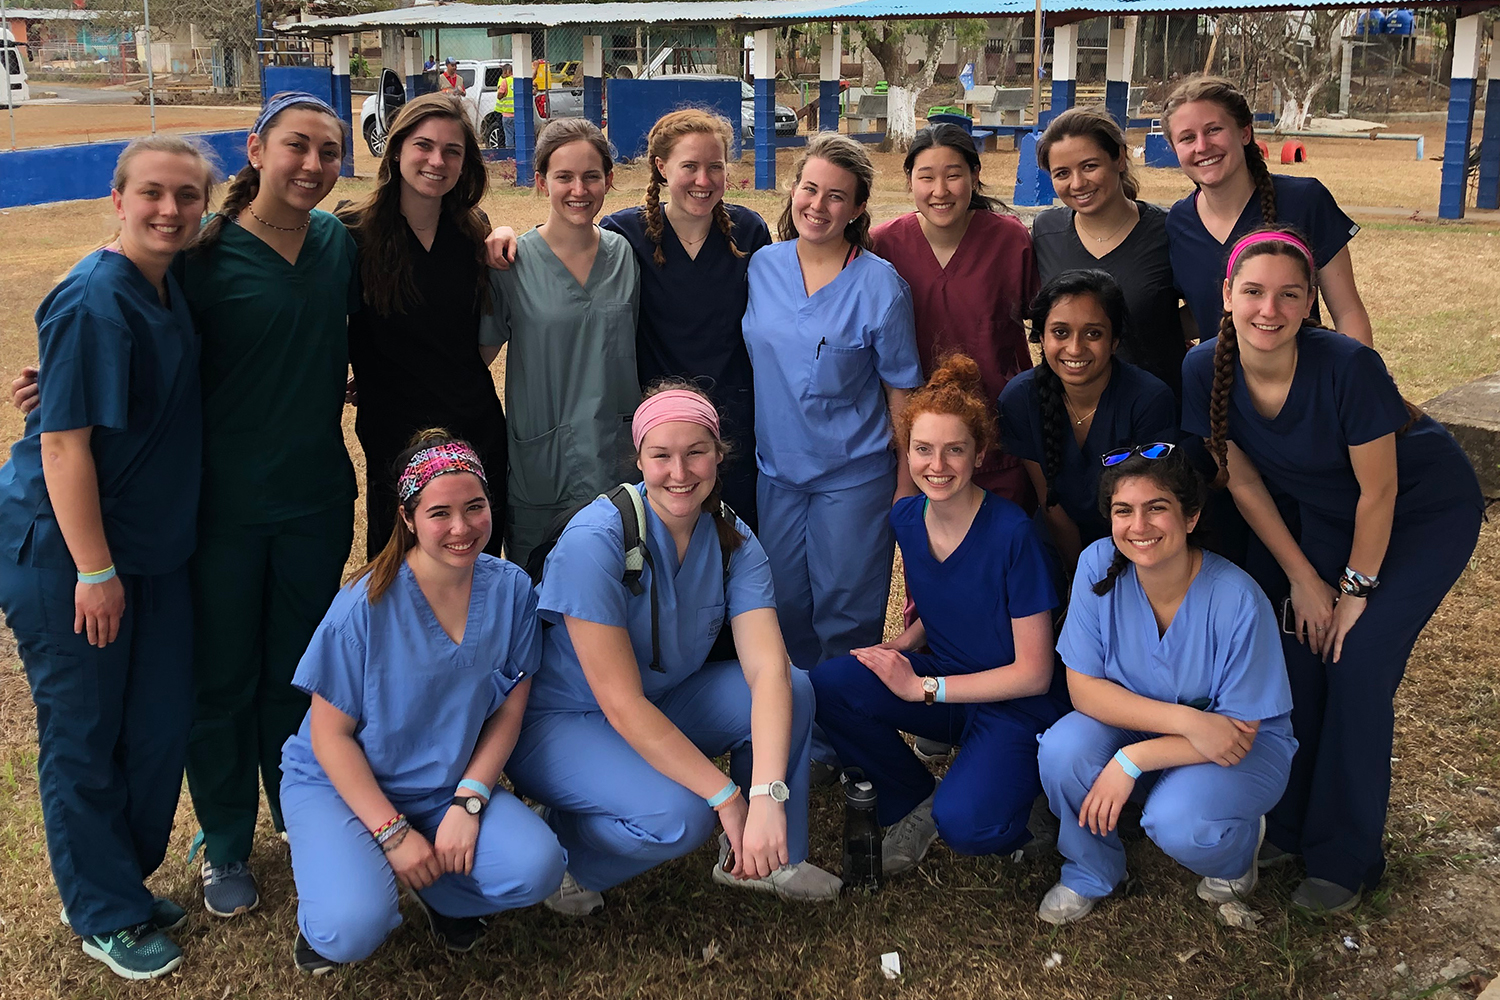 Group of nurses pose together for a group photo